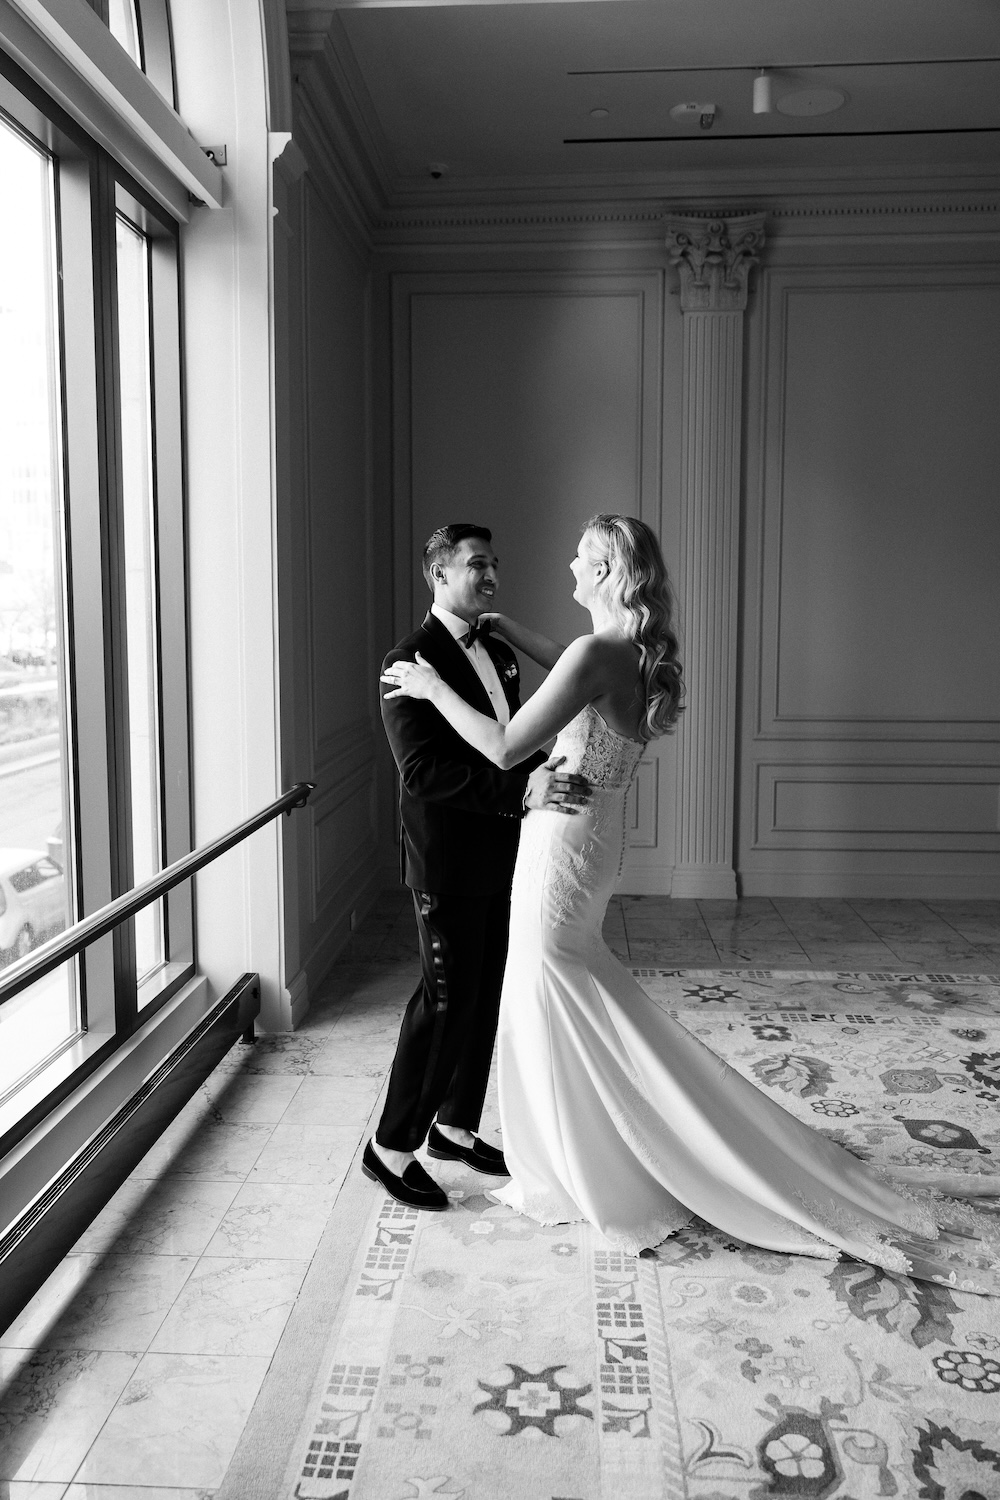 Bride and Groom wedding day first look reveal in front of large window. Modern Washington DC wedding at National Museum of Women in the Arts. Sarah Bradshaw Photography.